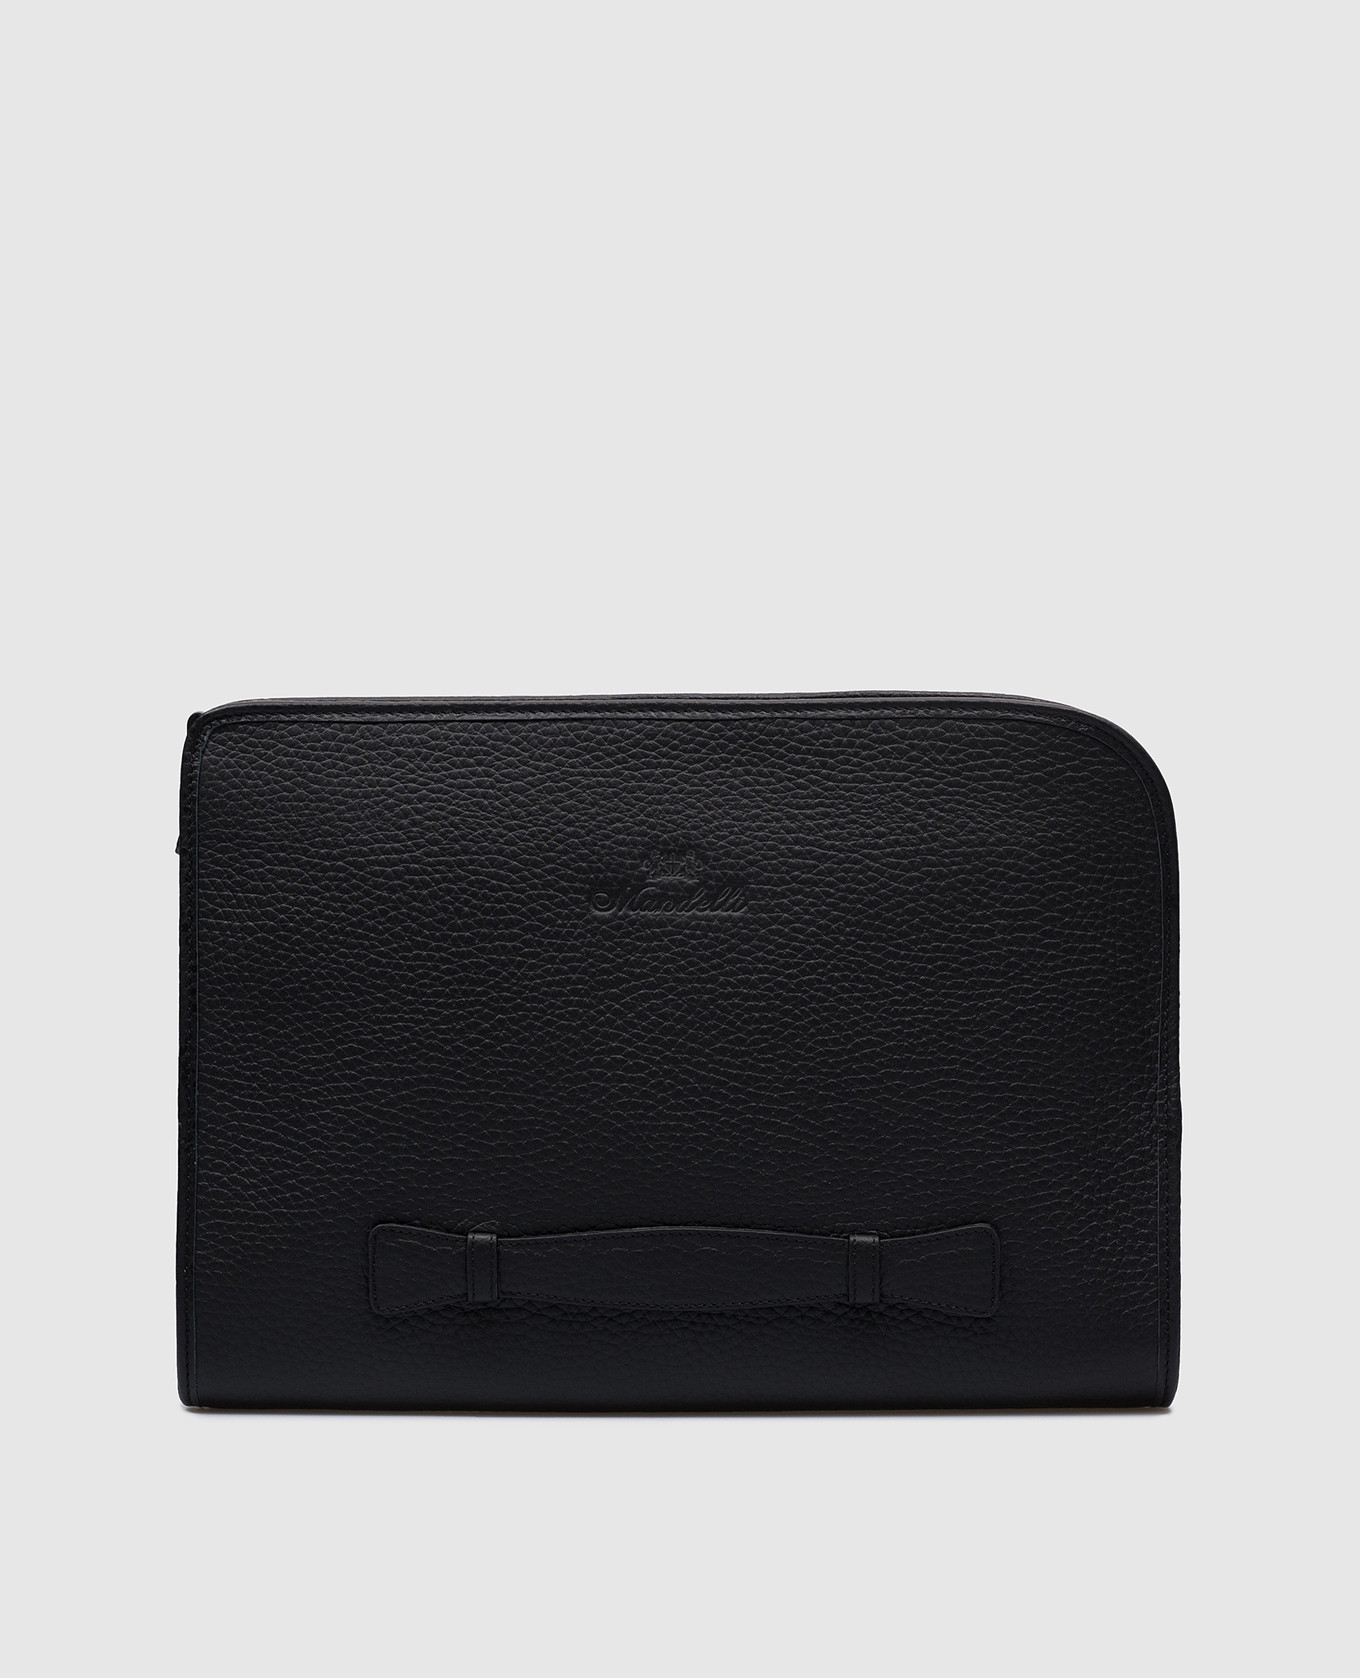 Black leather folder for documents with embossed logo